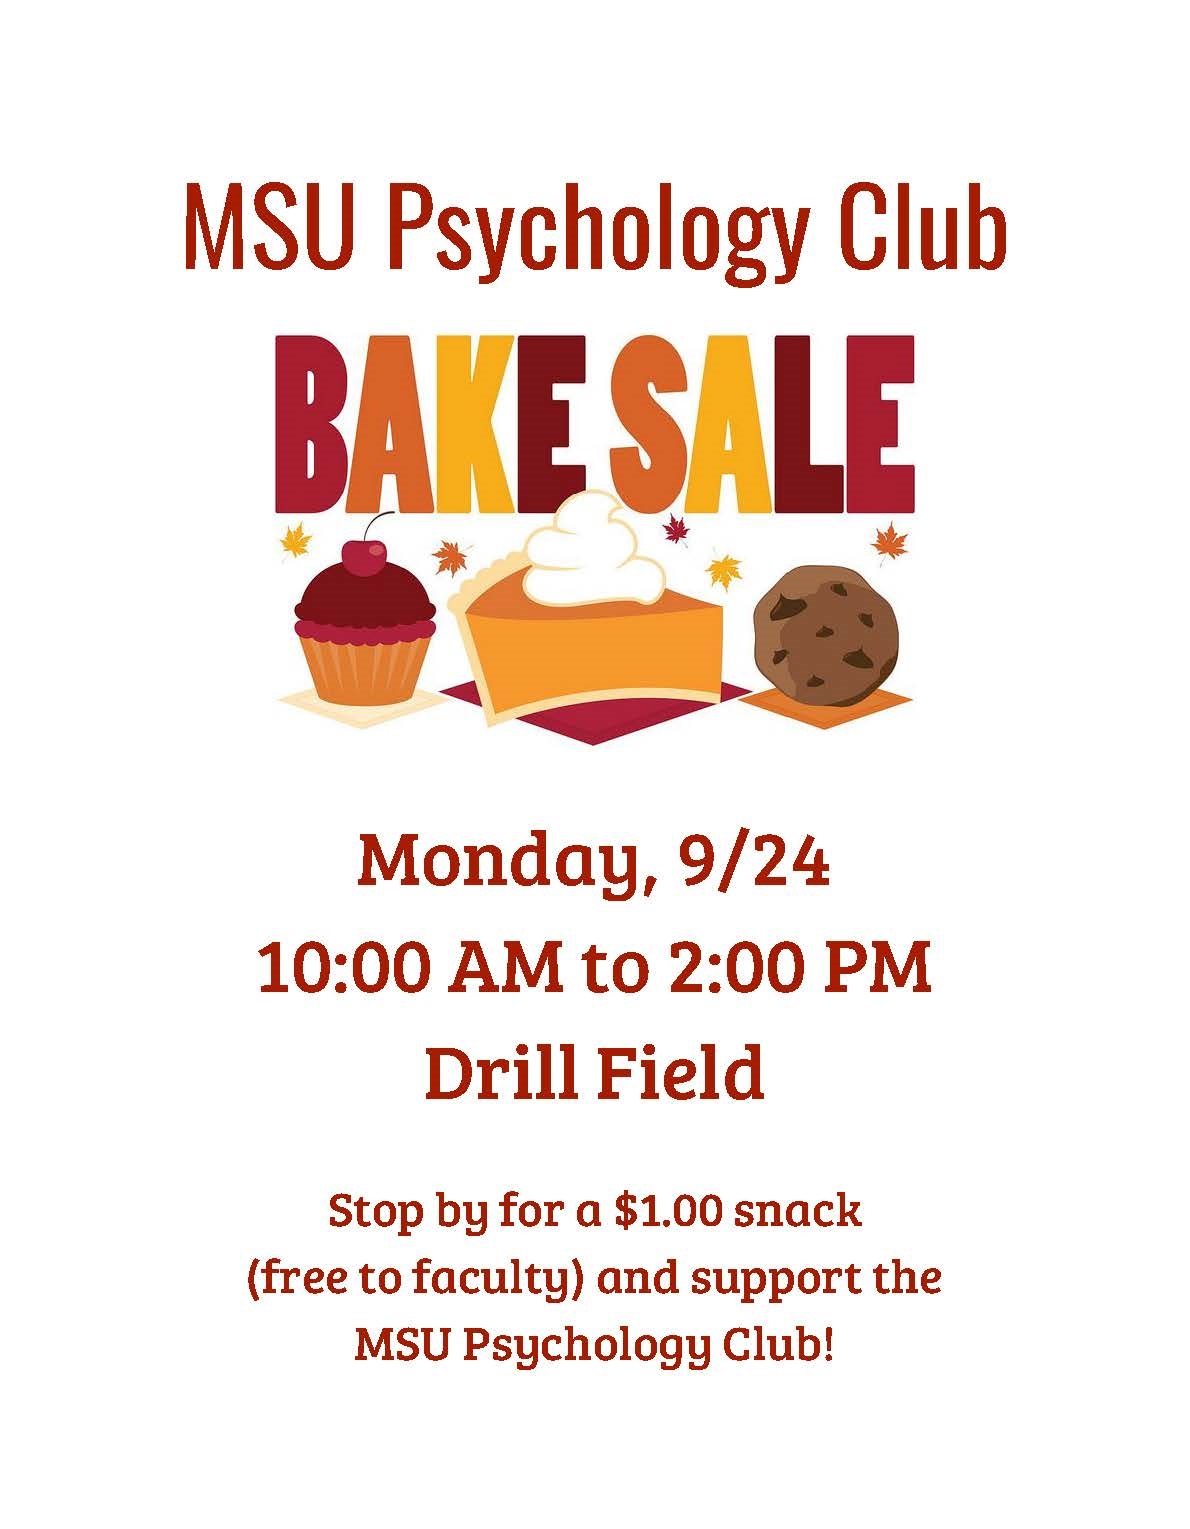 Bake sale poster. $1 food on drill field